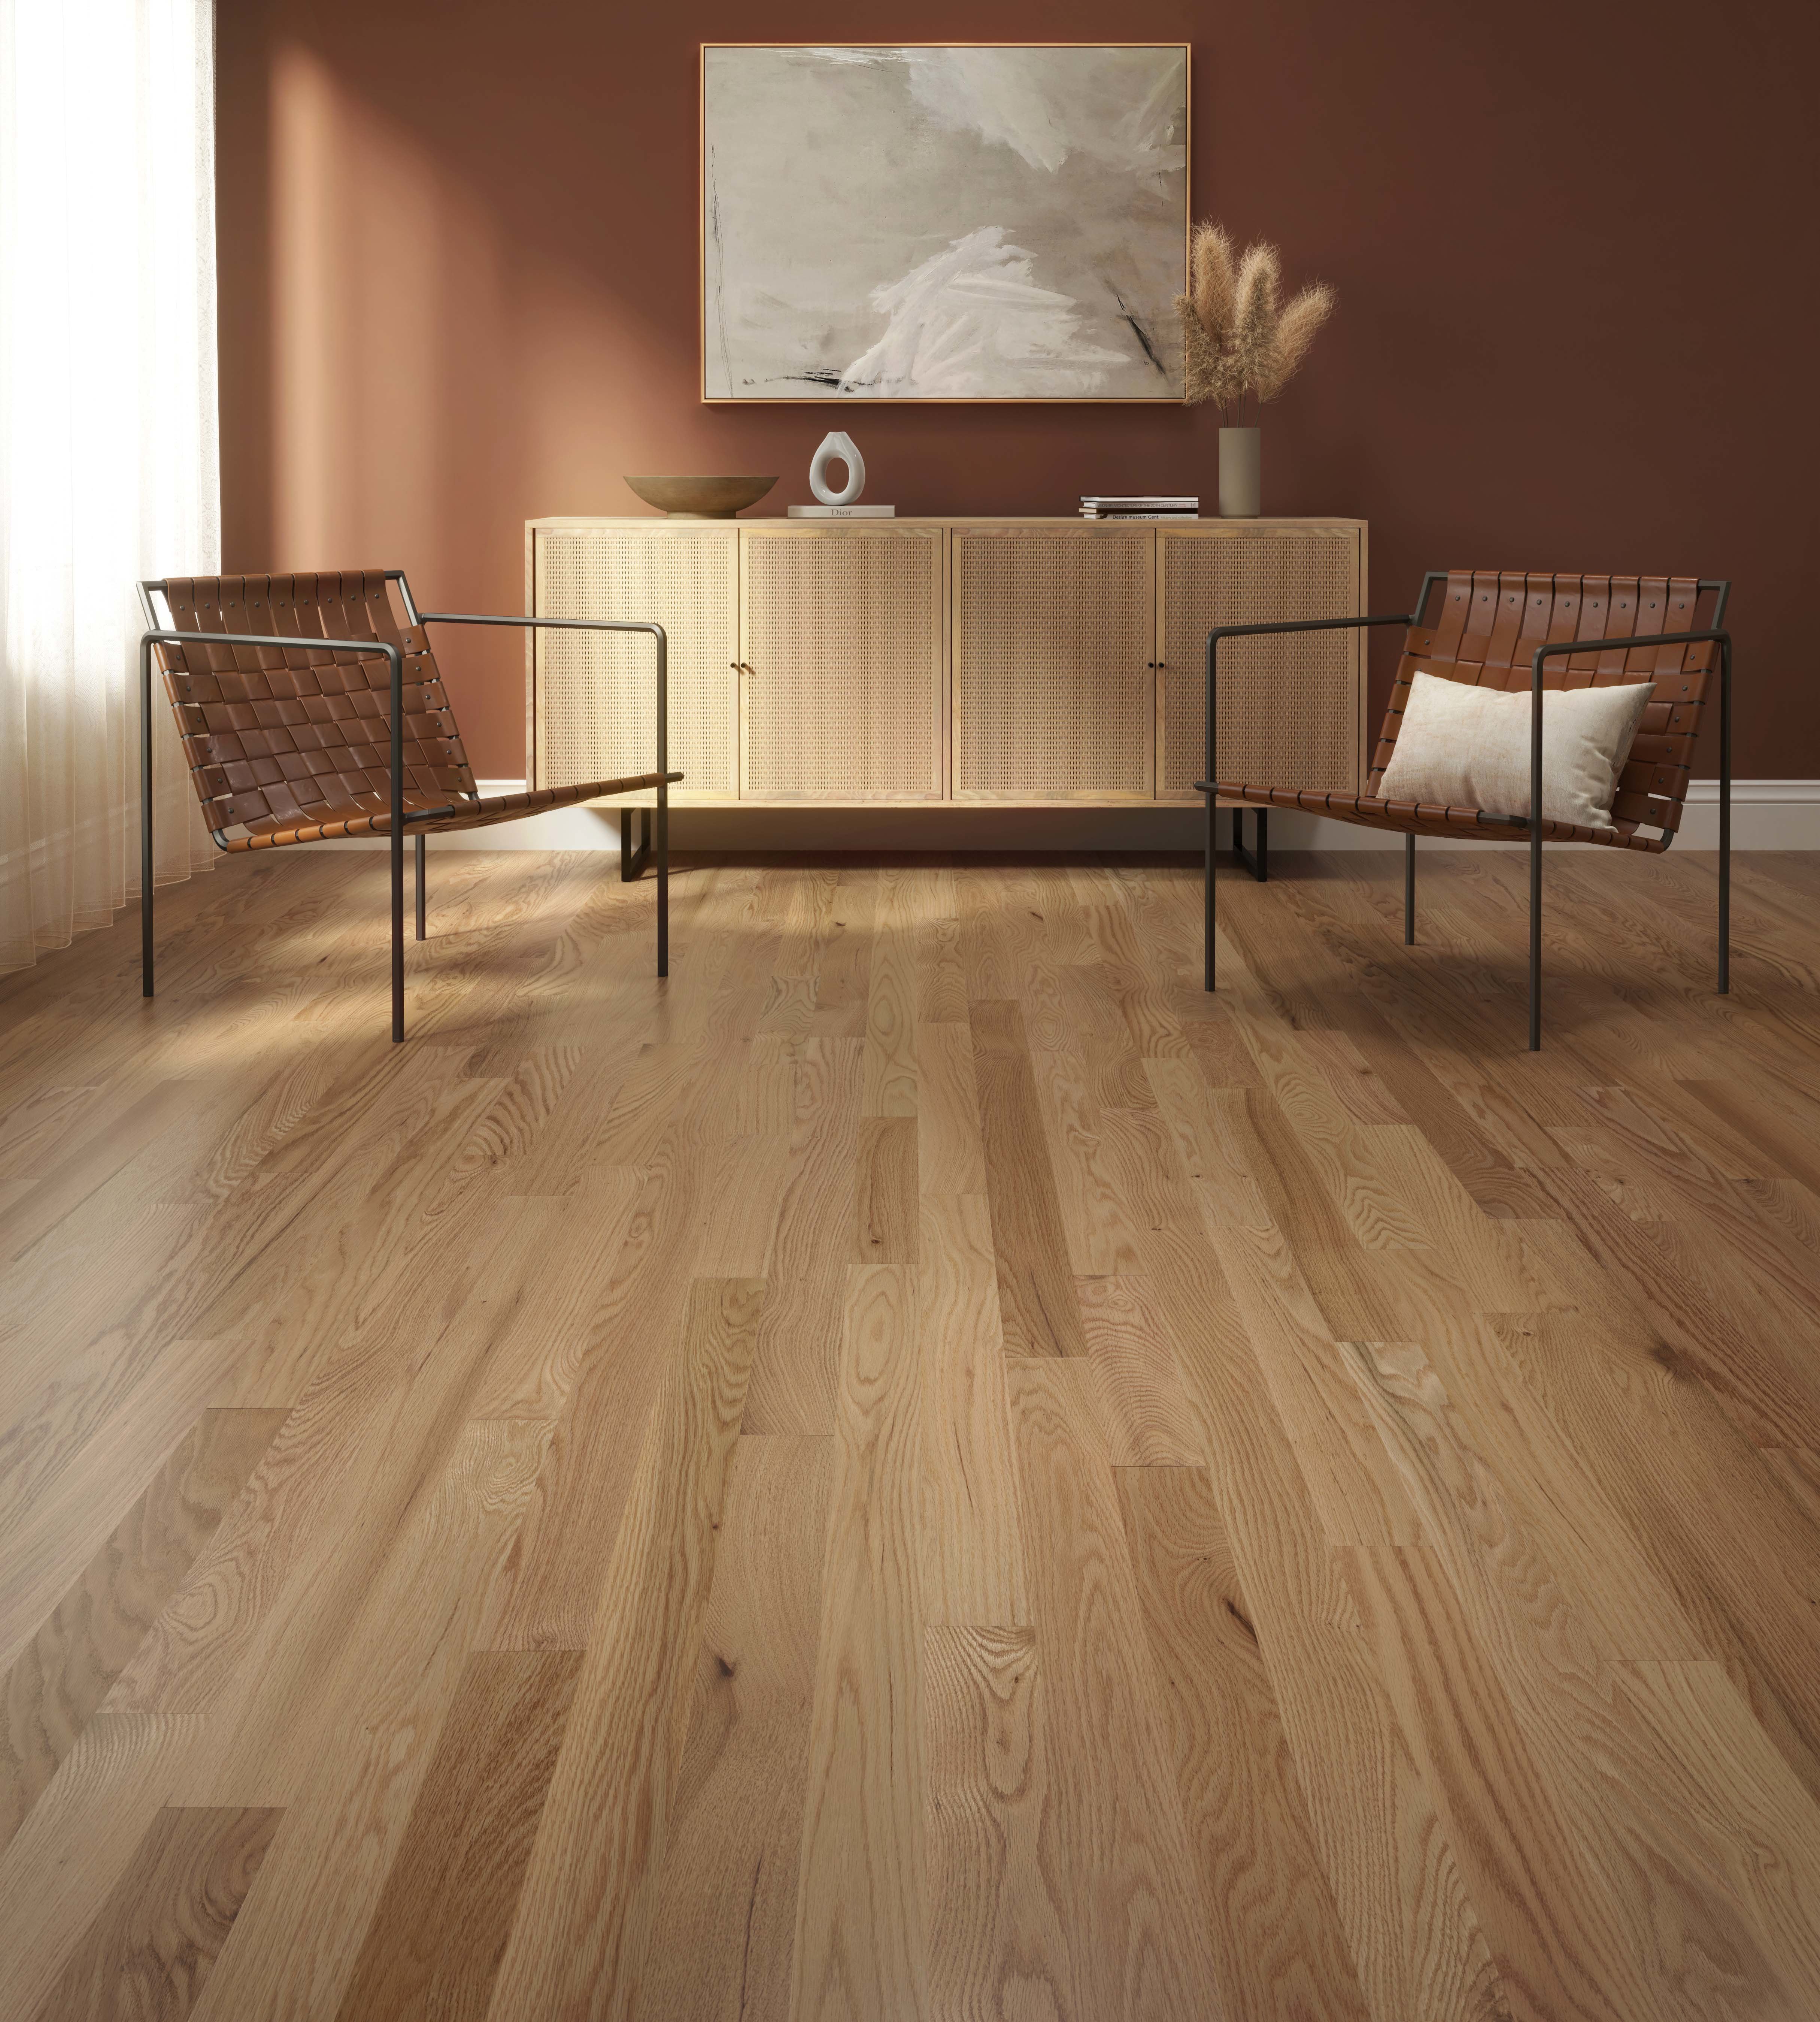 Red Oak Natural Elemental Smooth - Ambience image